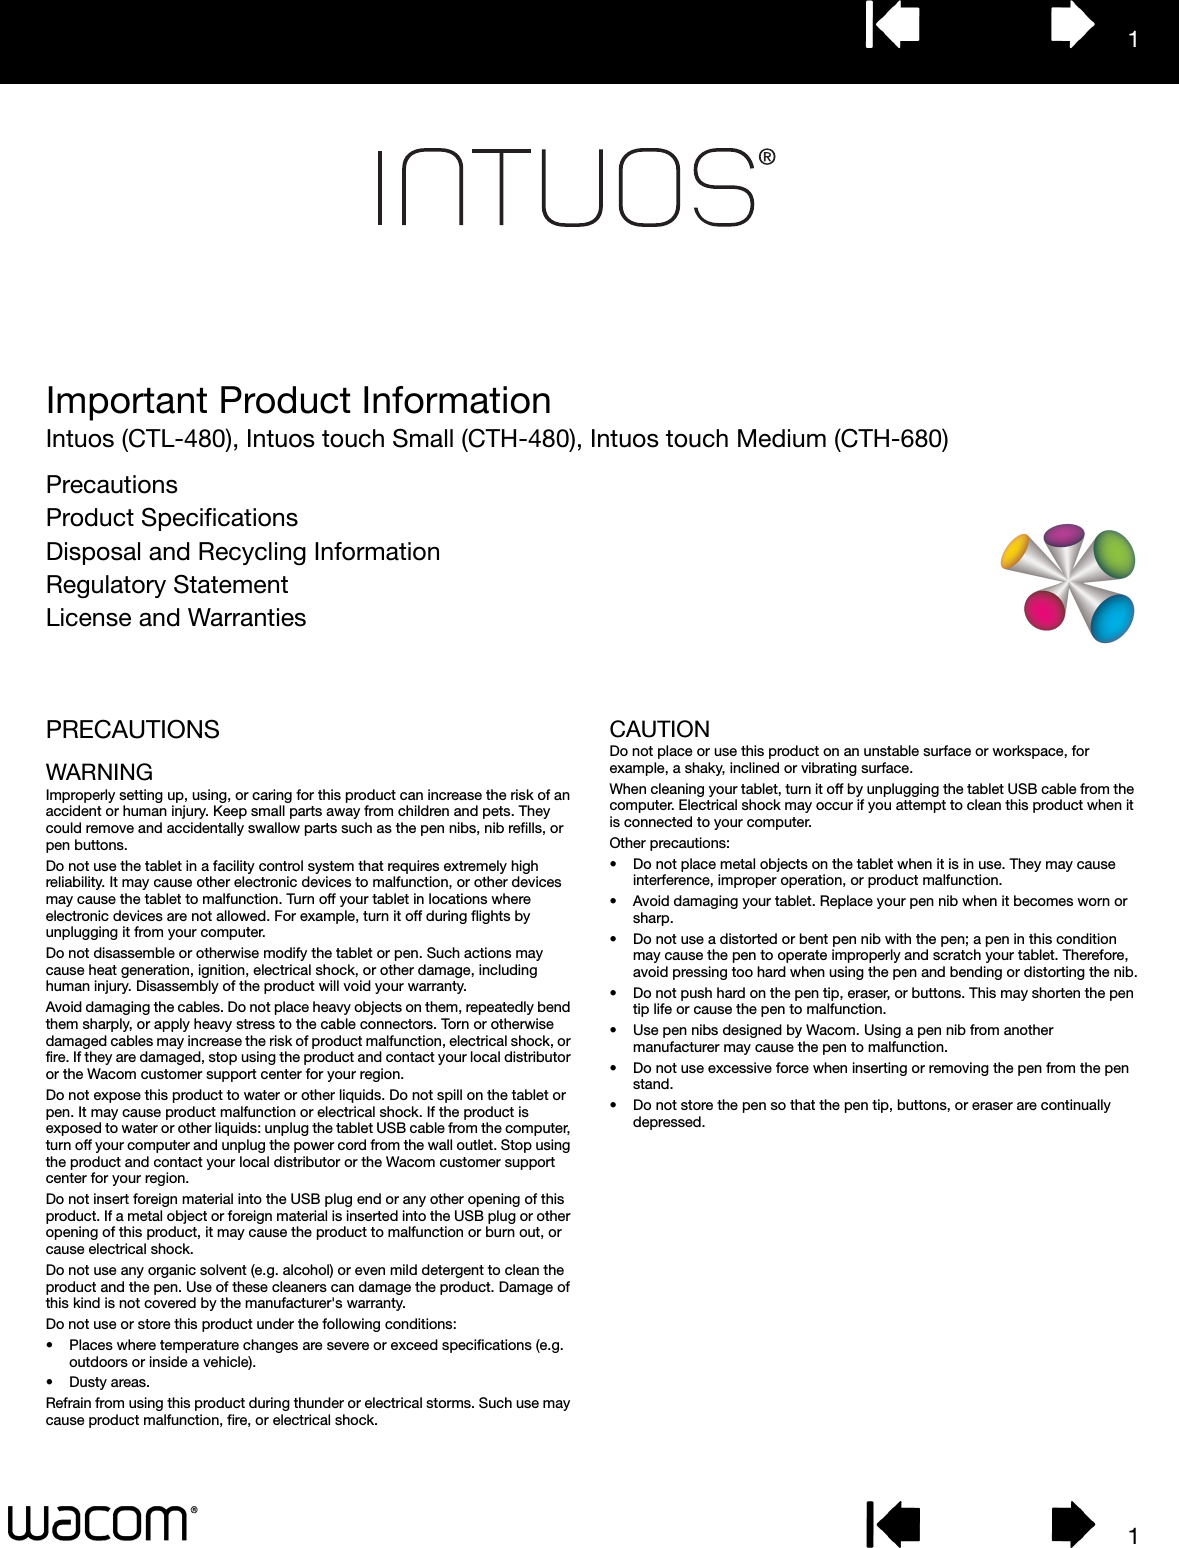 11Important Product InformationIntuos (CTL-480), Intuos touch Small (CTH-480), Intuos touch Medium (CTH-680)PrecautionsProduct SpecificationsDisposal and Recycling InformationRegulatory StatementLicense and WarrantiesPRECAUTIONSWARNINGImproperly setting up, using, or caring for this product can increase the risk of an accident or human injury. Keep small parts away from children and pets. They could remove and accidentally swallow parts such as the pen nibs, nib refills, or pen buttons. Do not use the tablet in a facility control system that requires extremely high reliability. It may cause other electronic devices to malfunction, or other devices may cause the tablet to malfunction. Turn off your tablet in locations where electronic devices are not allowed. For example, turn it off during flights by unplugging it from your computer.Do not disassemble or otherwise modify the tablet or pen. Such actions may cause heat generation, ignition, electrical shock, or other damage, including human injury. Disassembly of the product will void your warranty.Avoid damaging the cables. Do not place heavy objects on them, repeatedly bend them sharply, or apply heavy stress to the cable connectors. Torn or otherwise damaged cables may increase the risk of product malfunction, electrical shock, or fire. If they are damaged, stop using the product and contact your local distributor or the Wacom customer support center for your region.Do not expose this product to water or other liquids. Do not spill on the tablet or pen. It may cause product malfunction or electrical shock. If the product is exposed to water or other liquids: unplug the tablet USB cable from the computer, turn off your computer and unplug the power cord from the wall outlet. Stop using the product and contact your local distributor or the Wacom customer support center for your region. Do not insert foreign material into the USB plug end or any other opening of this product. If a metal object or foreign material is inserted into the USB plug or other opening of this product, it may cause the product to malfunction or burn out, or cause electrical shock.Do not use any organic solvent (e.g. alcohol) or even mild detergent to clean the product and the pen. Use of these cleaners can damage the product. Damage of this kind is not covered by the manufacturer&apos;s warranty.Do not use or store this product under the following conditions:• Places where temperature changes are severe or exceed specifications (e.g. outdoors or inside a vehicle).• Dusty areas.Refrain from using this product during thunder or electrical storms. Such use may cause product malfunction, fire, or electrical shock.CAUTIONDo not place or use this product on an unstable surface or workspace, for example, a shaky, inclined or vibrating surface.When cleaning your tablet, turn it off by unplugging the tablet USB cable from the computer. Electrical shock may occur if you attempt to clean this product when it is connected to your computer.Other precautions:• Do not place metal objects on the tablet when it is in use. They may cause interference, improper operation, or product malfunction.• Avoid damaging your tablet. Replace your pen nib when it becomes worn or sharp.• Do not use a distorted or bent pen nib with the pen; a pen in this condition may cause the pen to operate improperly and scratch your tablet. Therefore, avoid pressing too hard when using the pen and bending or distorting the nib.• Do not push hard on the pen tip, eraser, or buttons. This may shorten the pen tip life or cause the pen to malfunction.• Use pen nibs designed by Wacom. Using a pen nib from another manufacturer may cause the pen to malfunction.• Do not use excessive force when inserting or removing the pen from the pen stand.• Do not store the pen so that the pen tip, buttons, or eraser are continually depressed.